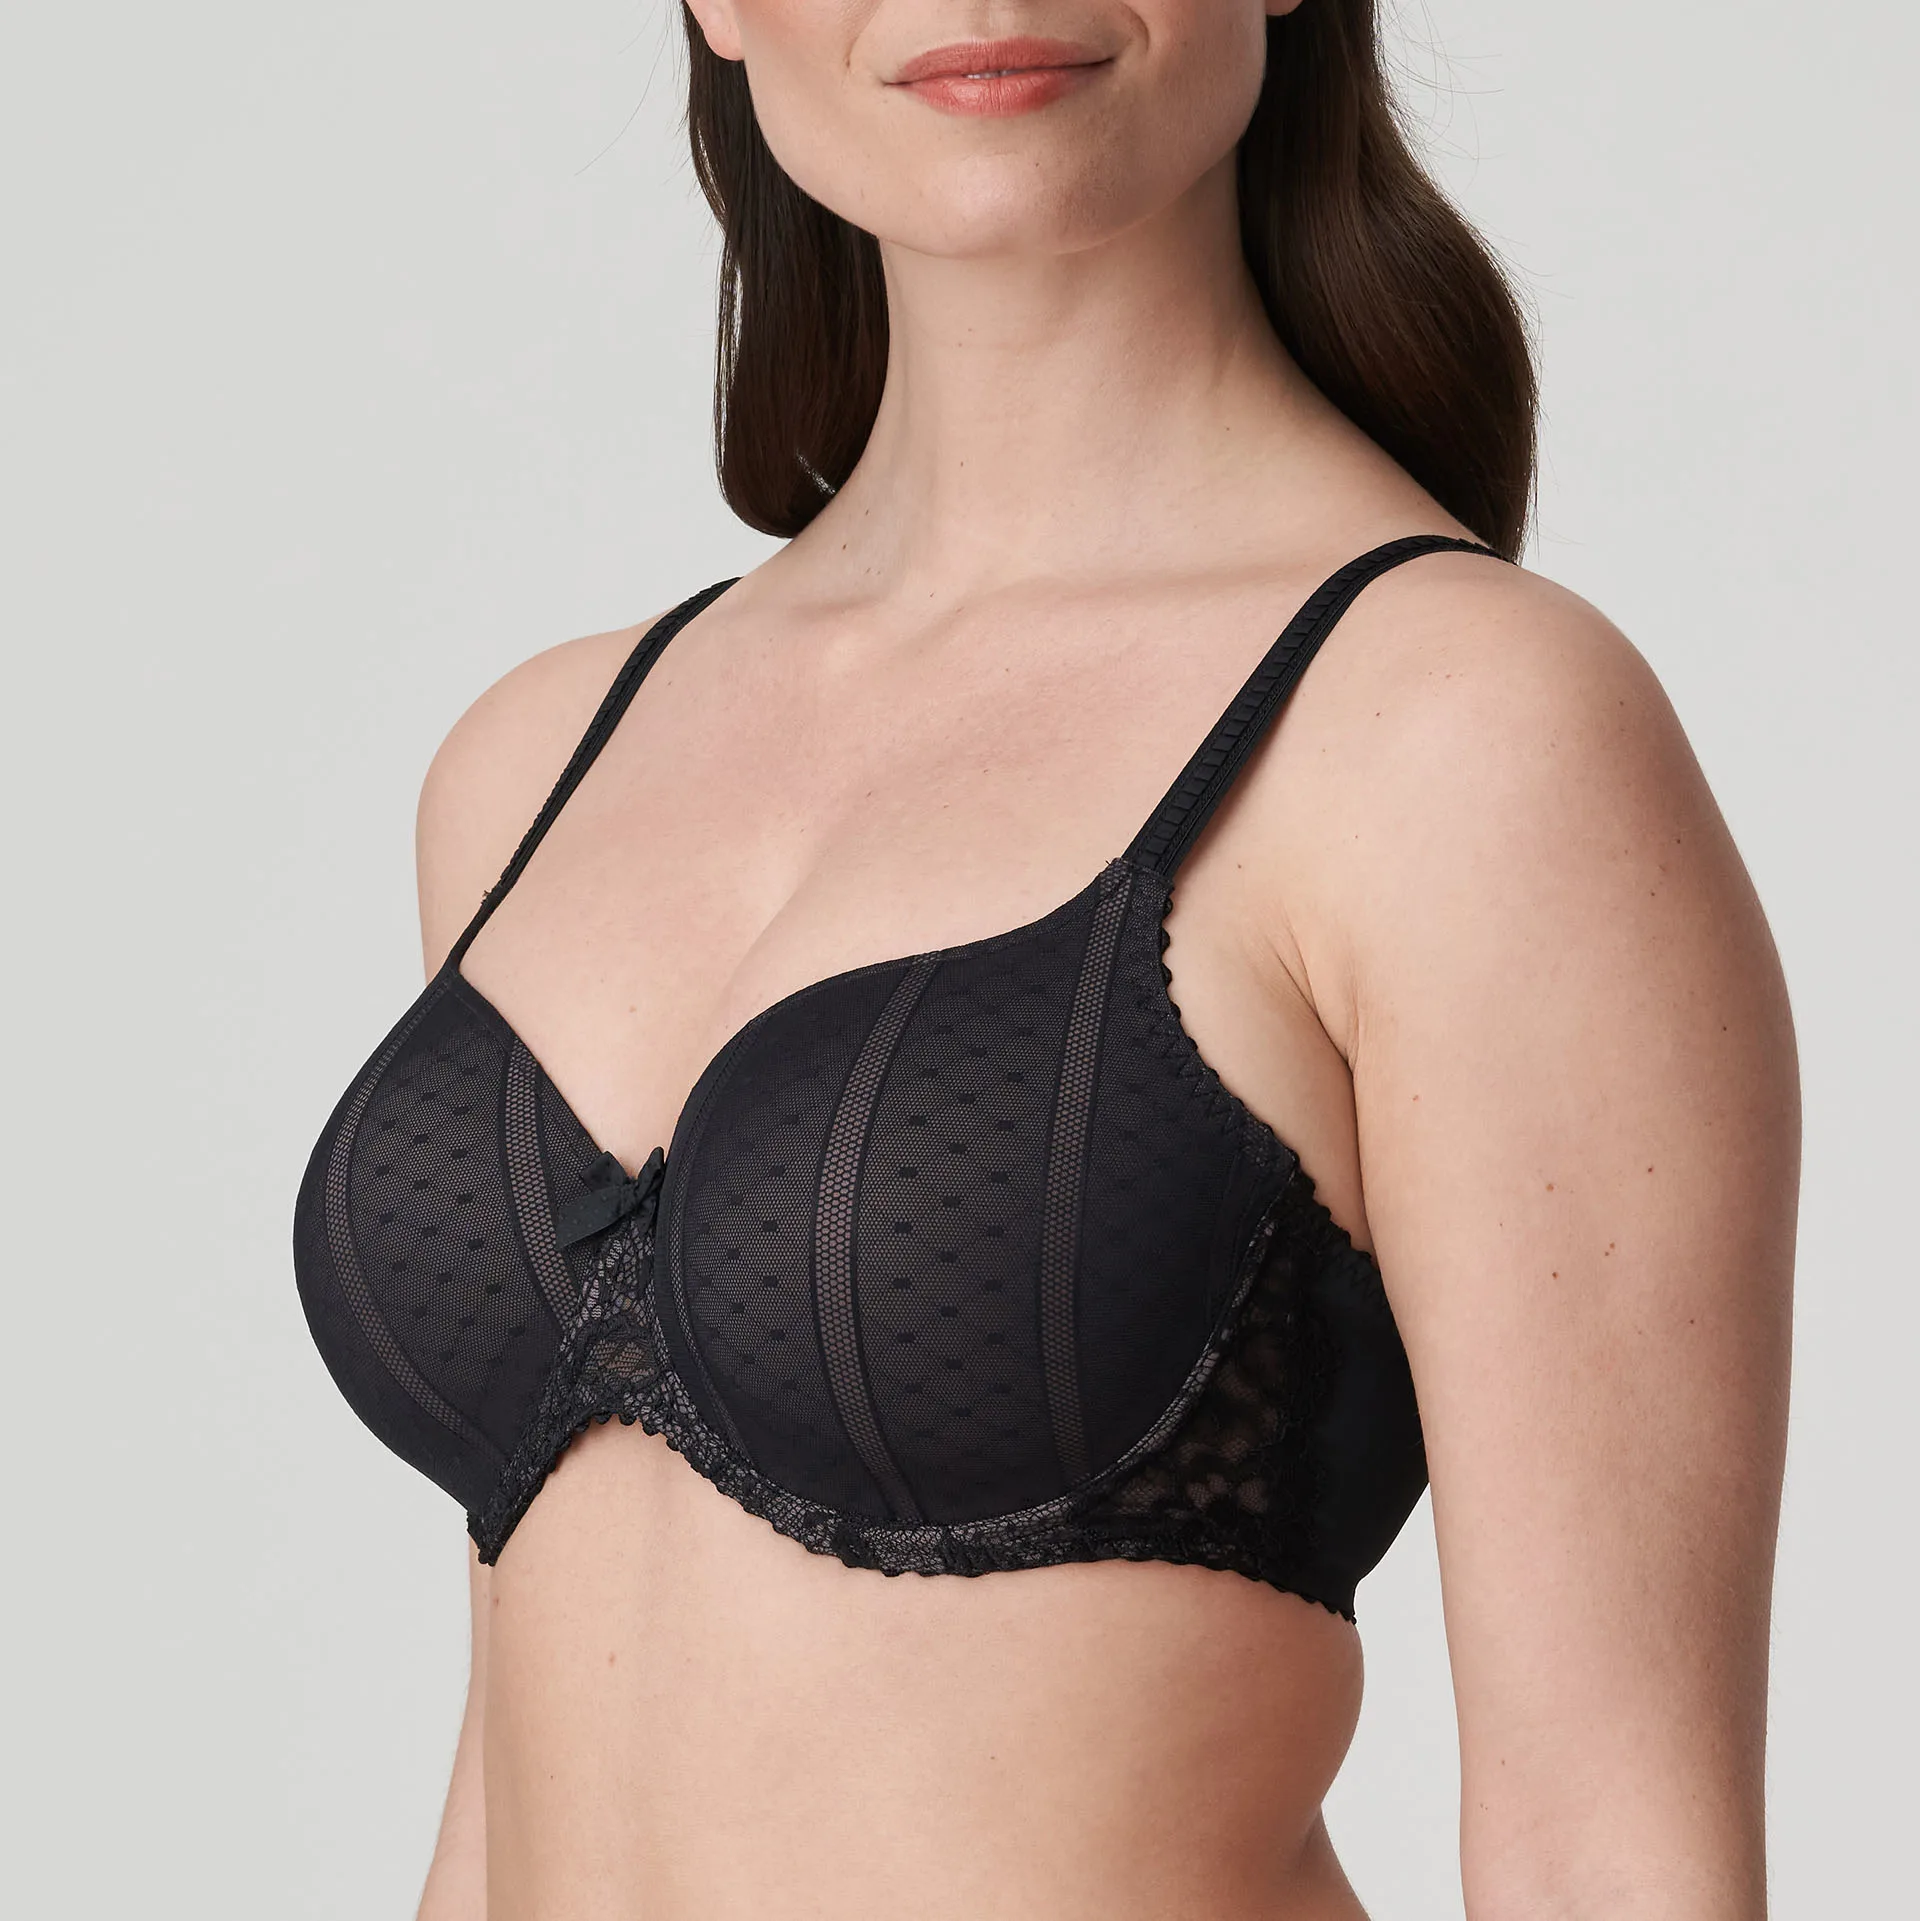 PrimaDonna COUTURE black padded bra - full cup